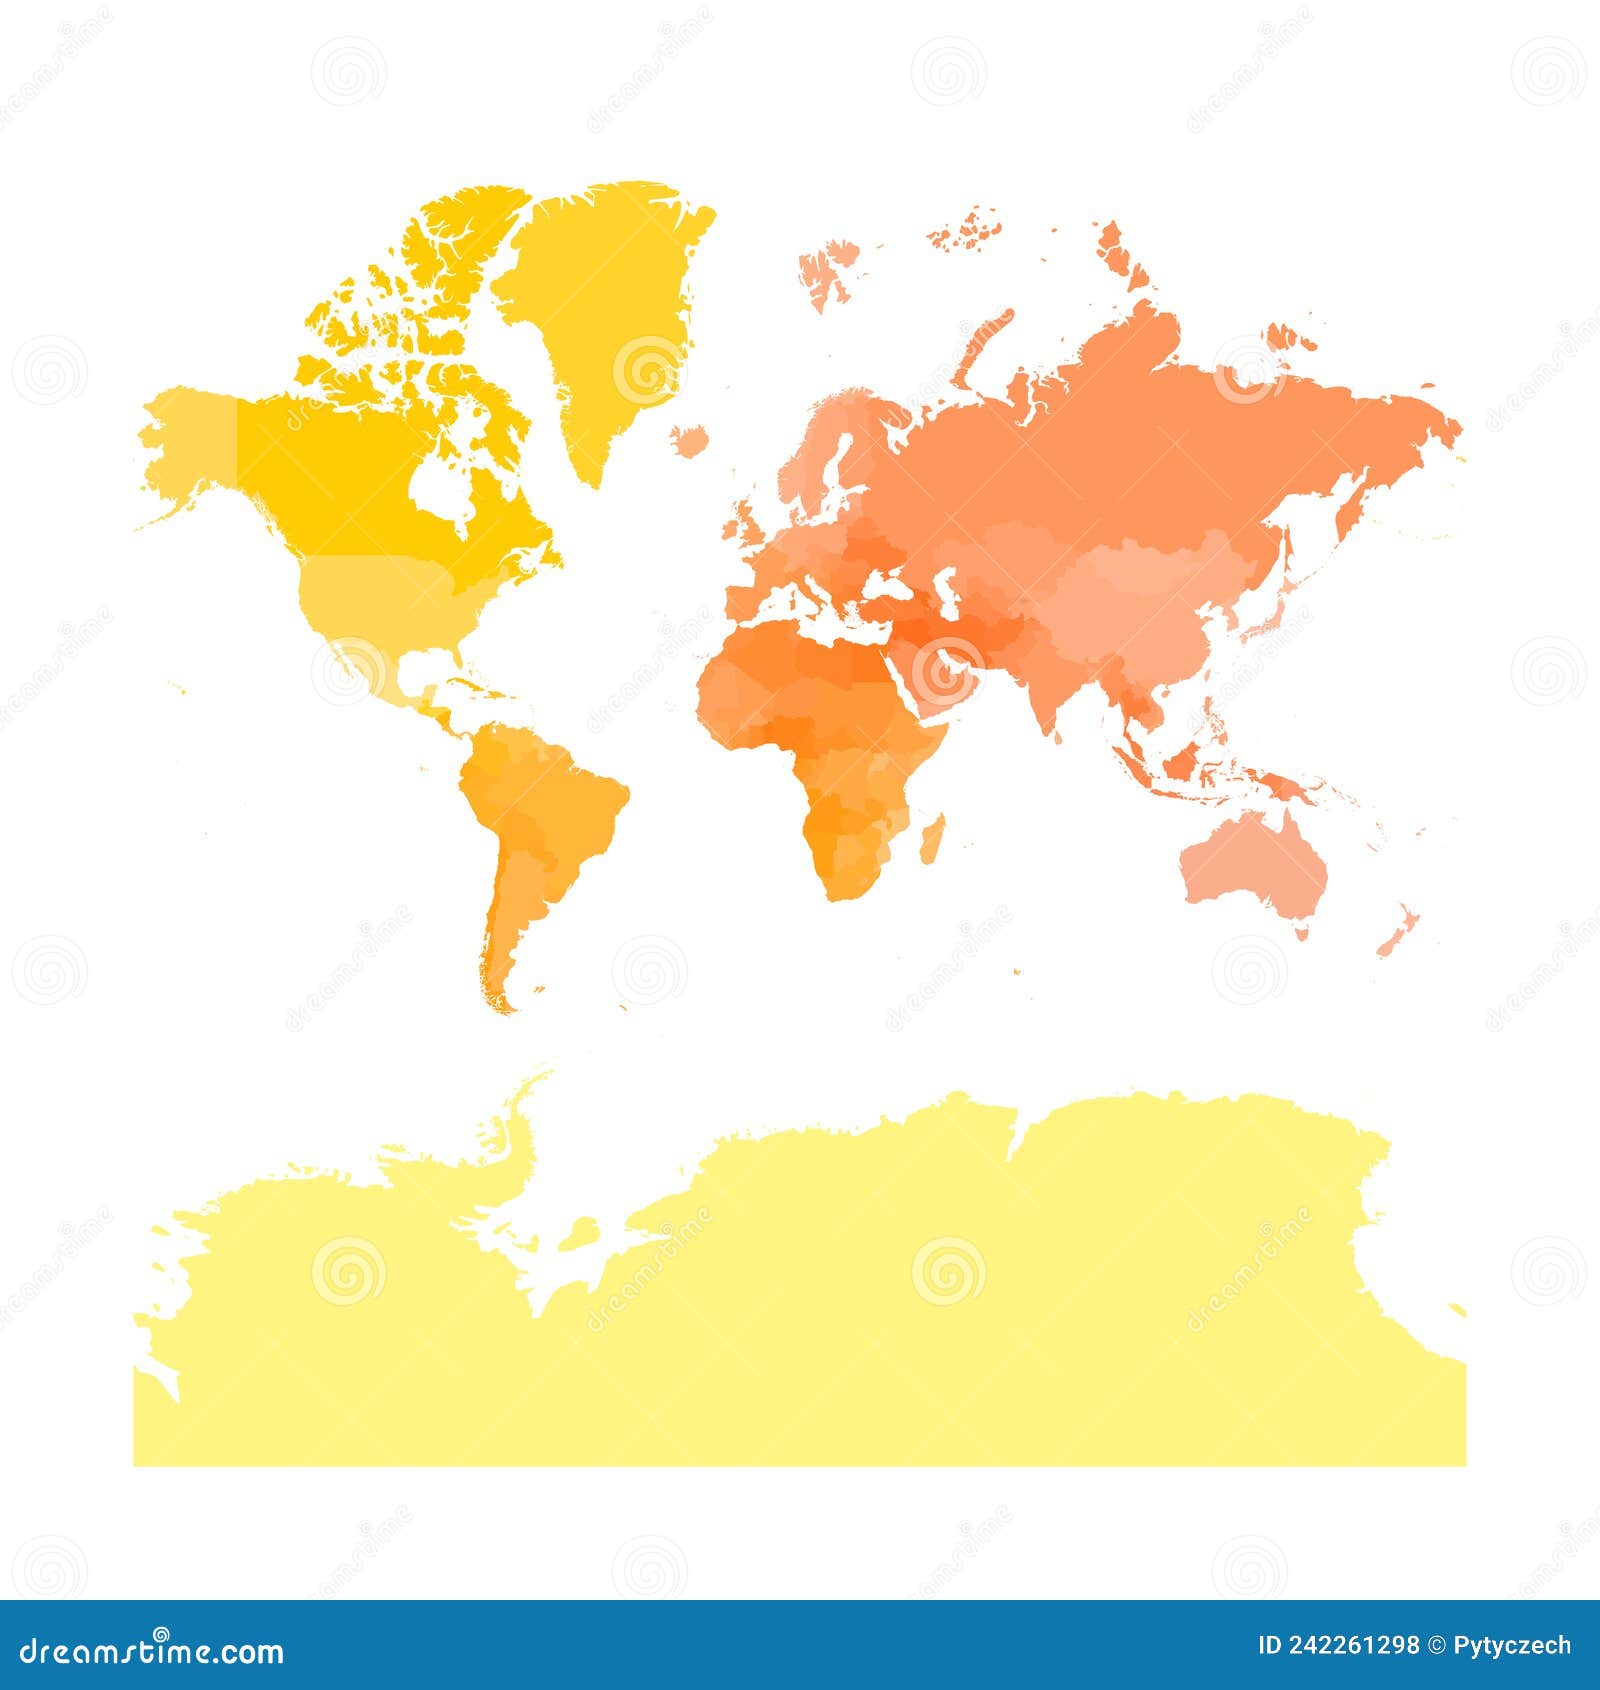 Colorful Political Map of World. Stock Vector - Illustration of ...